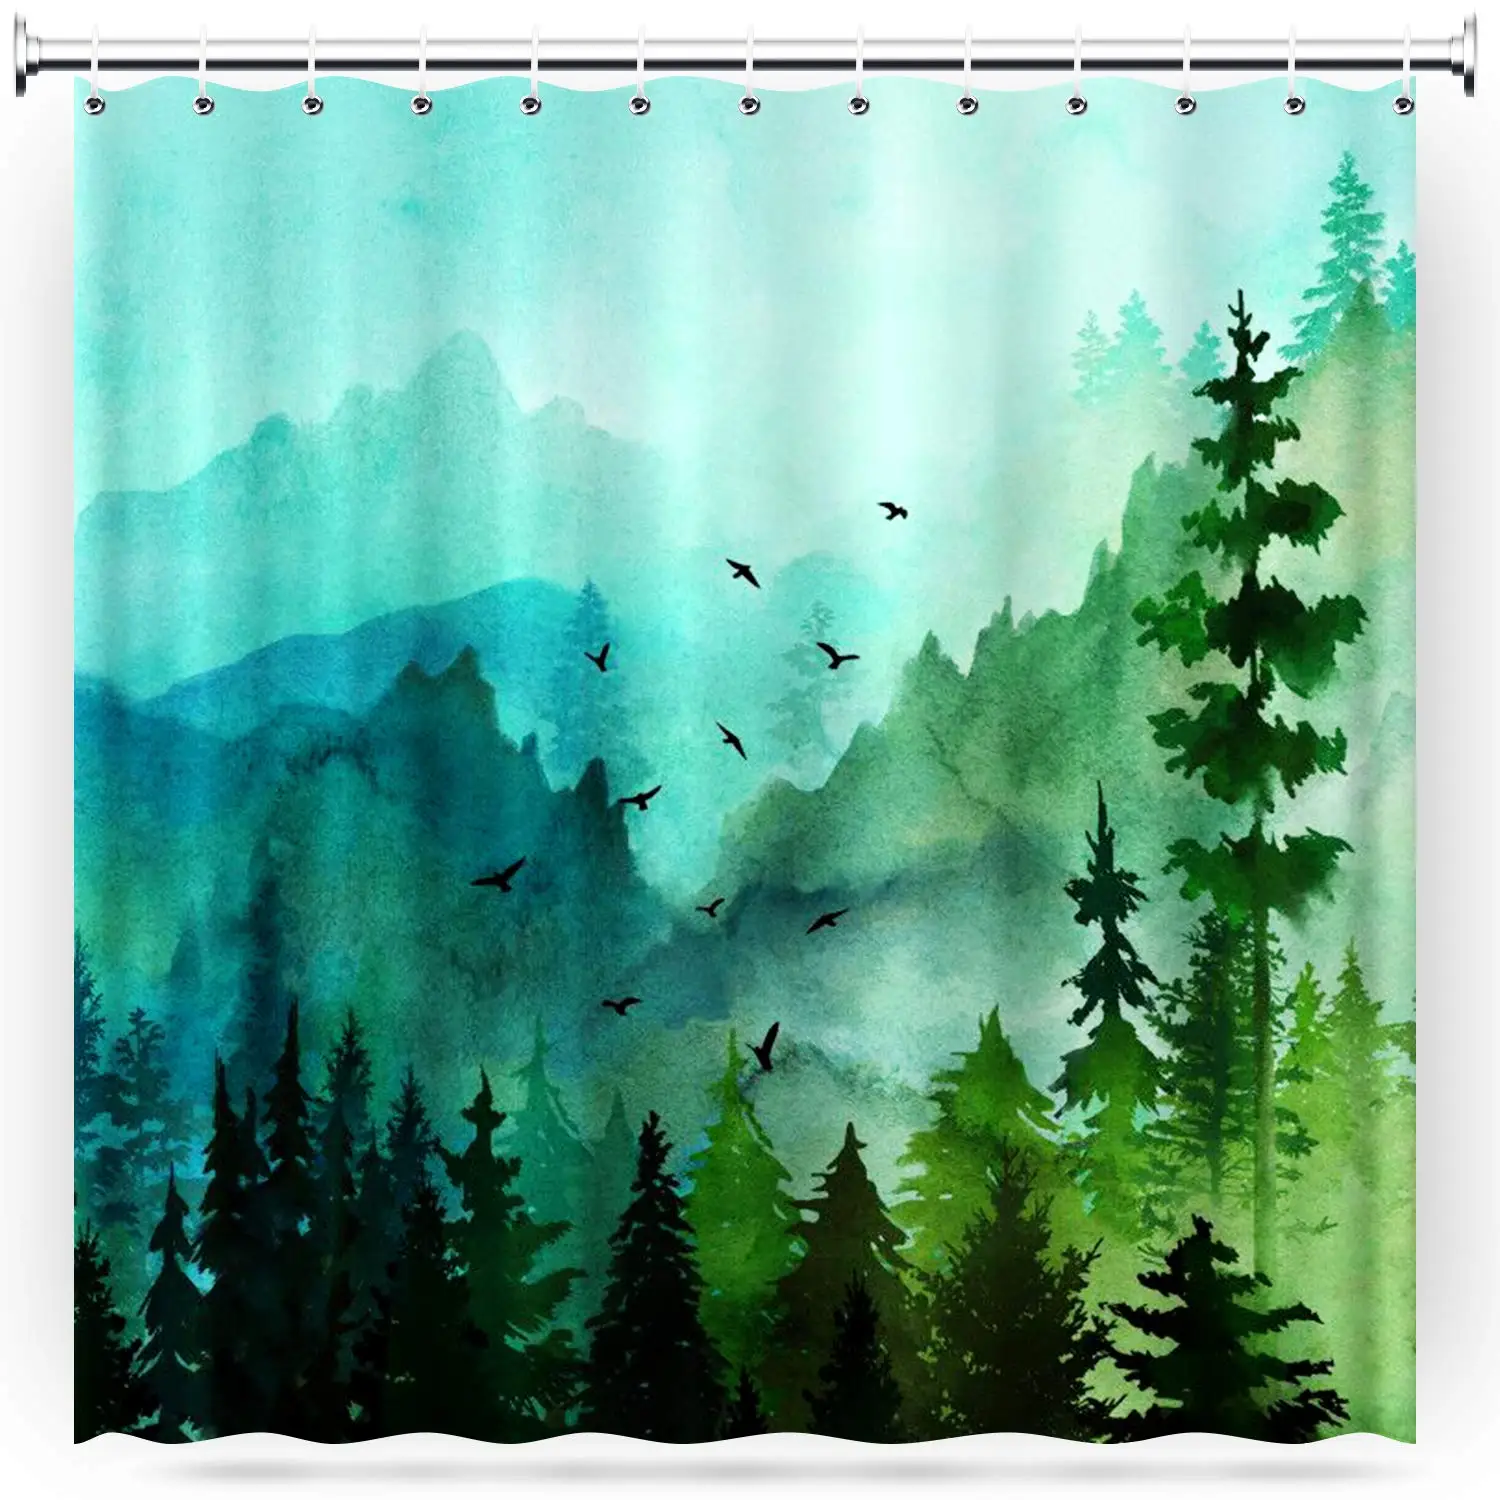 

Nature Forest Shower Curtain Misty Mountain Forest Bird Foggy Pine Tree Cloudy Rustic Nature Scenery Landscape Fabric Bath Decor